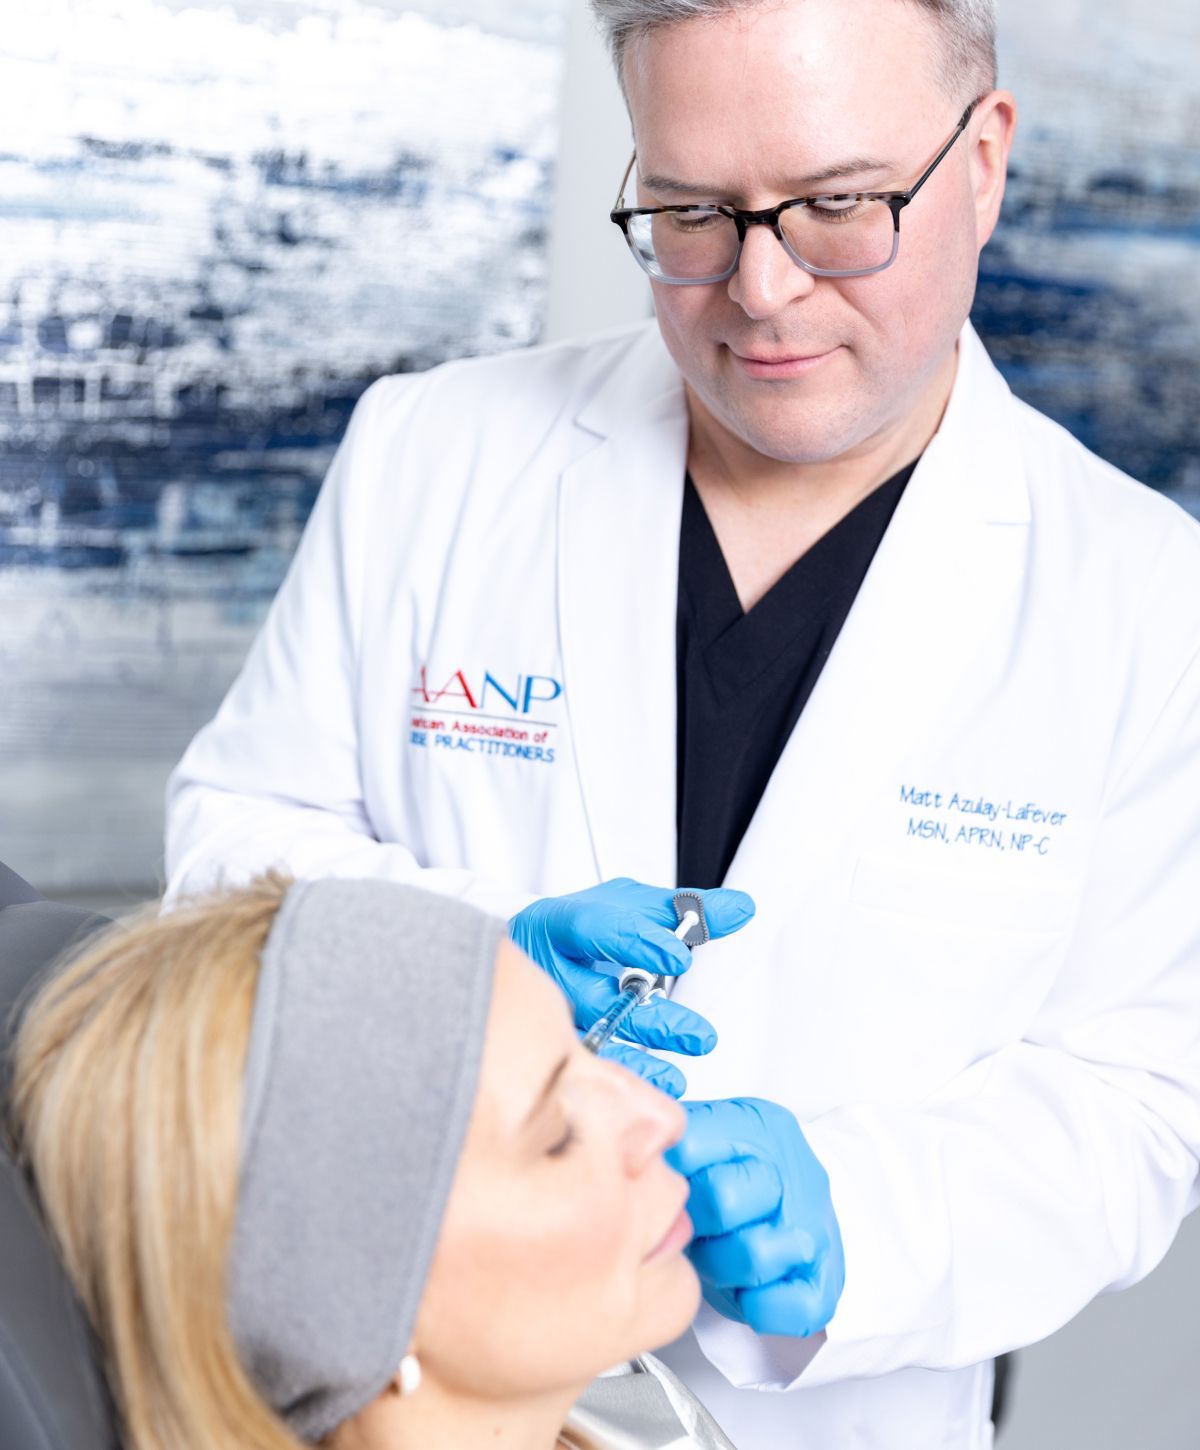 Franklin Kybella patient receiving an injection